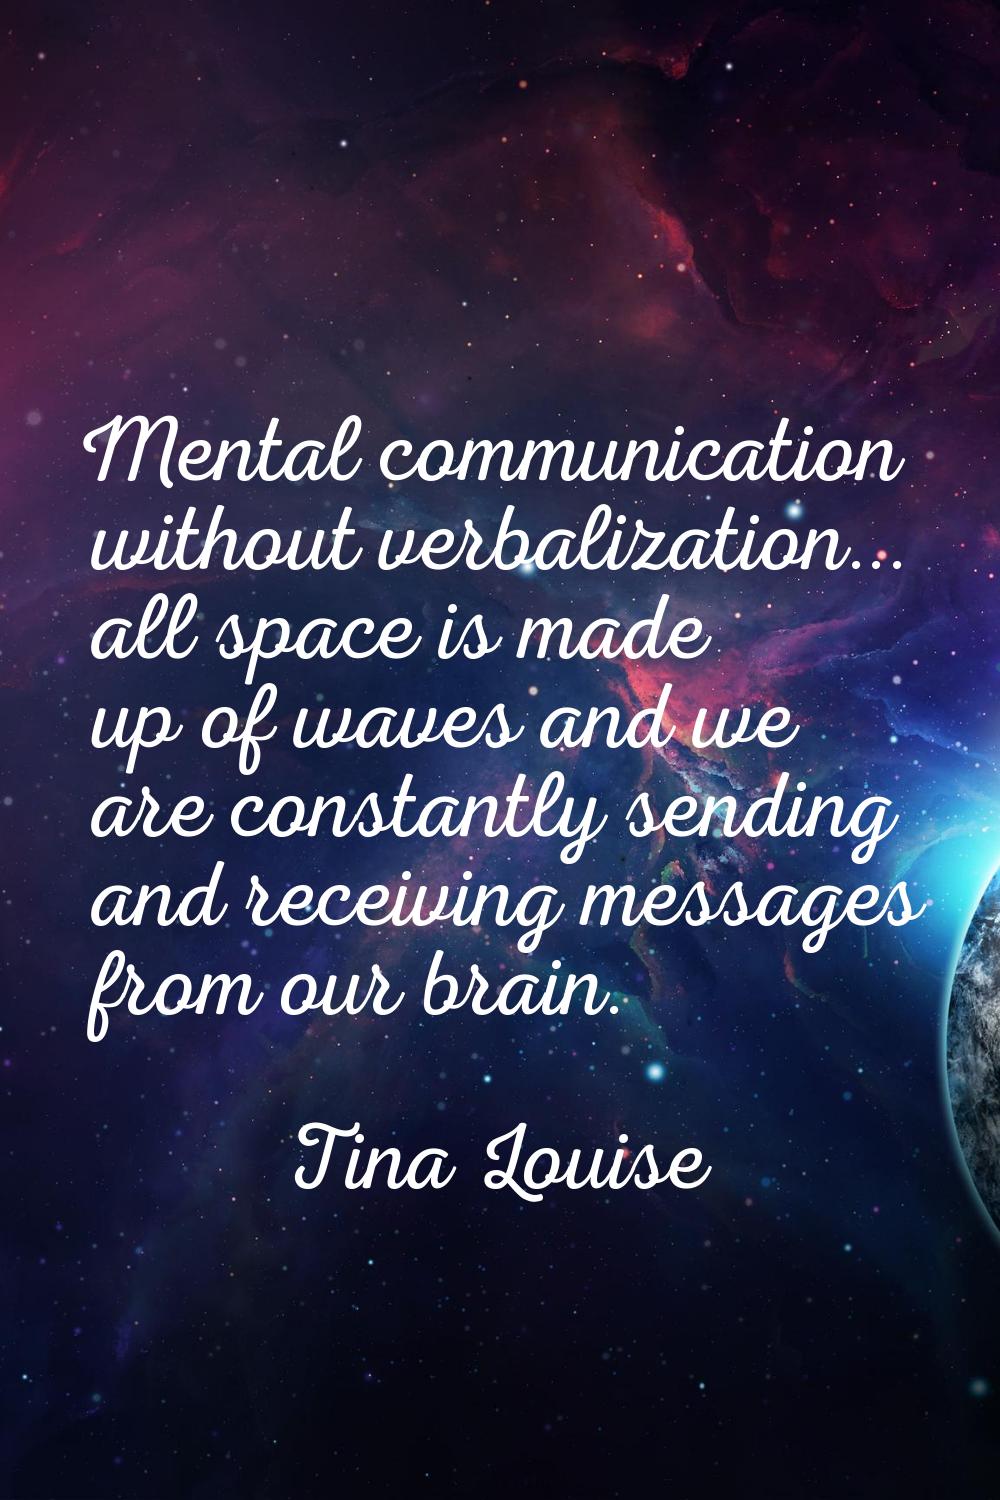 Mental communication without verbalization... all space is made up of waves and we are constantly s